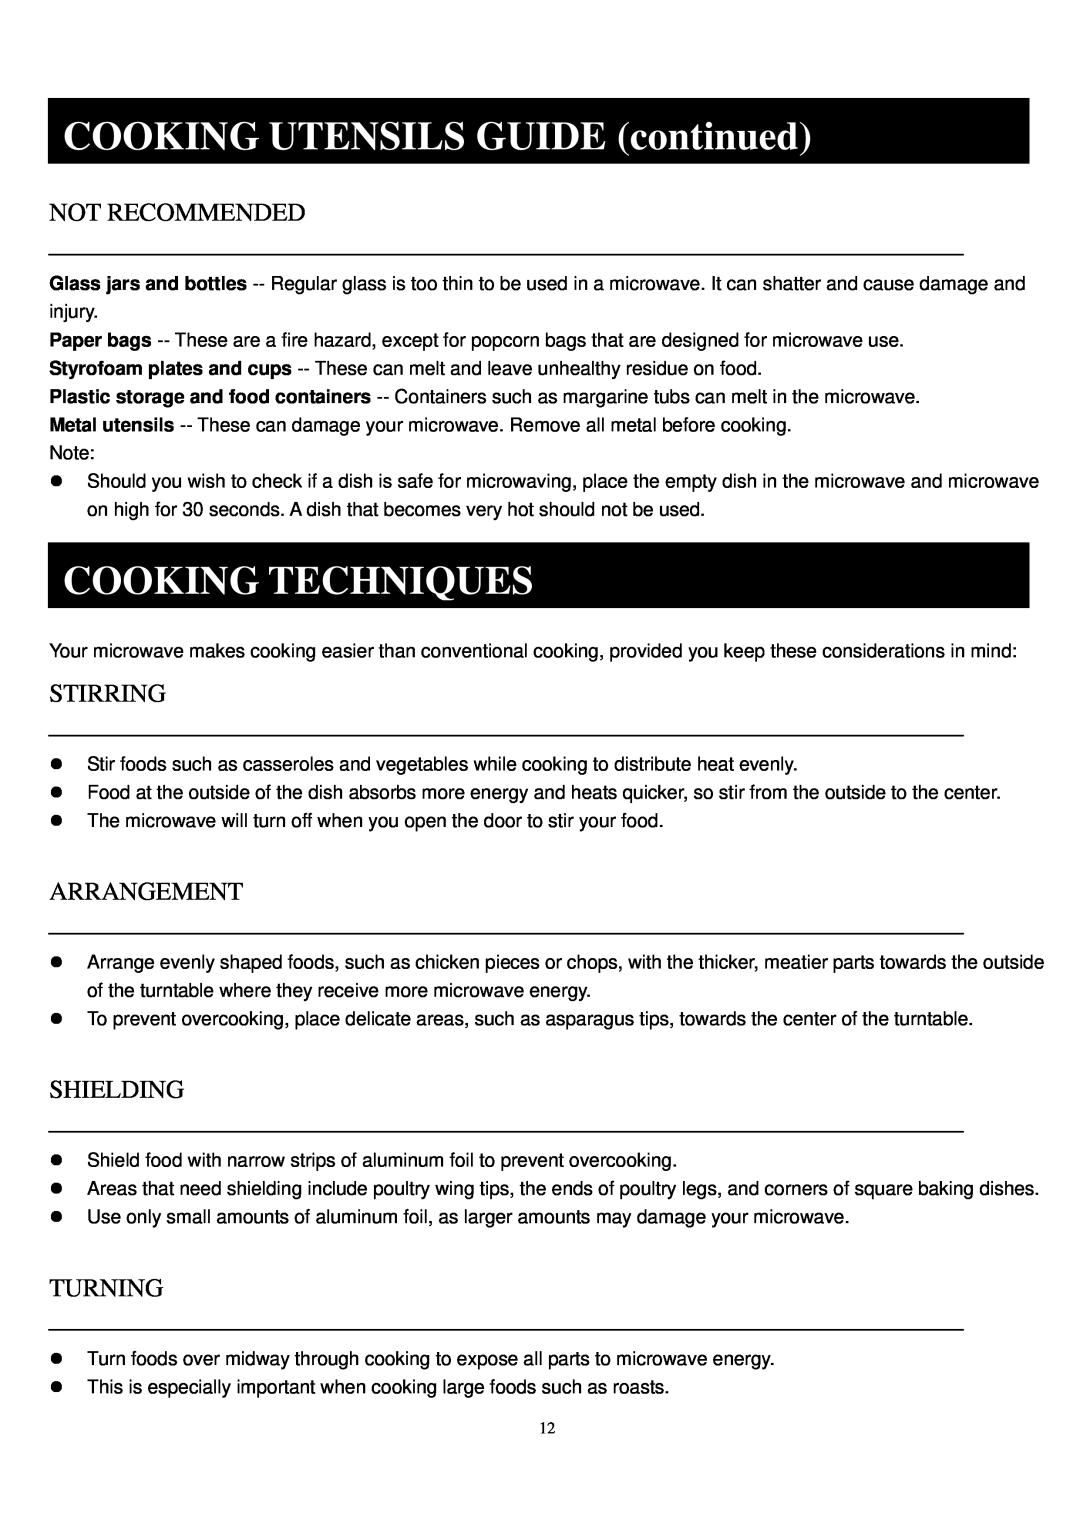 Sunbeam SGA9901 COOKING UTENSILS GUIDE continued, Cooking Techniques, Not Recommended, Stirring, Arrangement, Shielding 